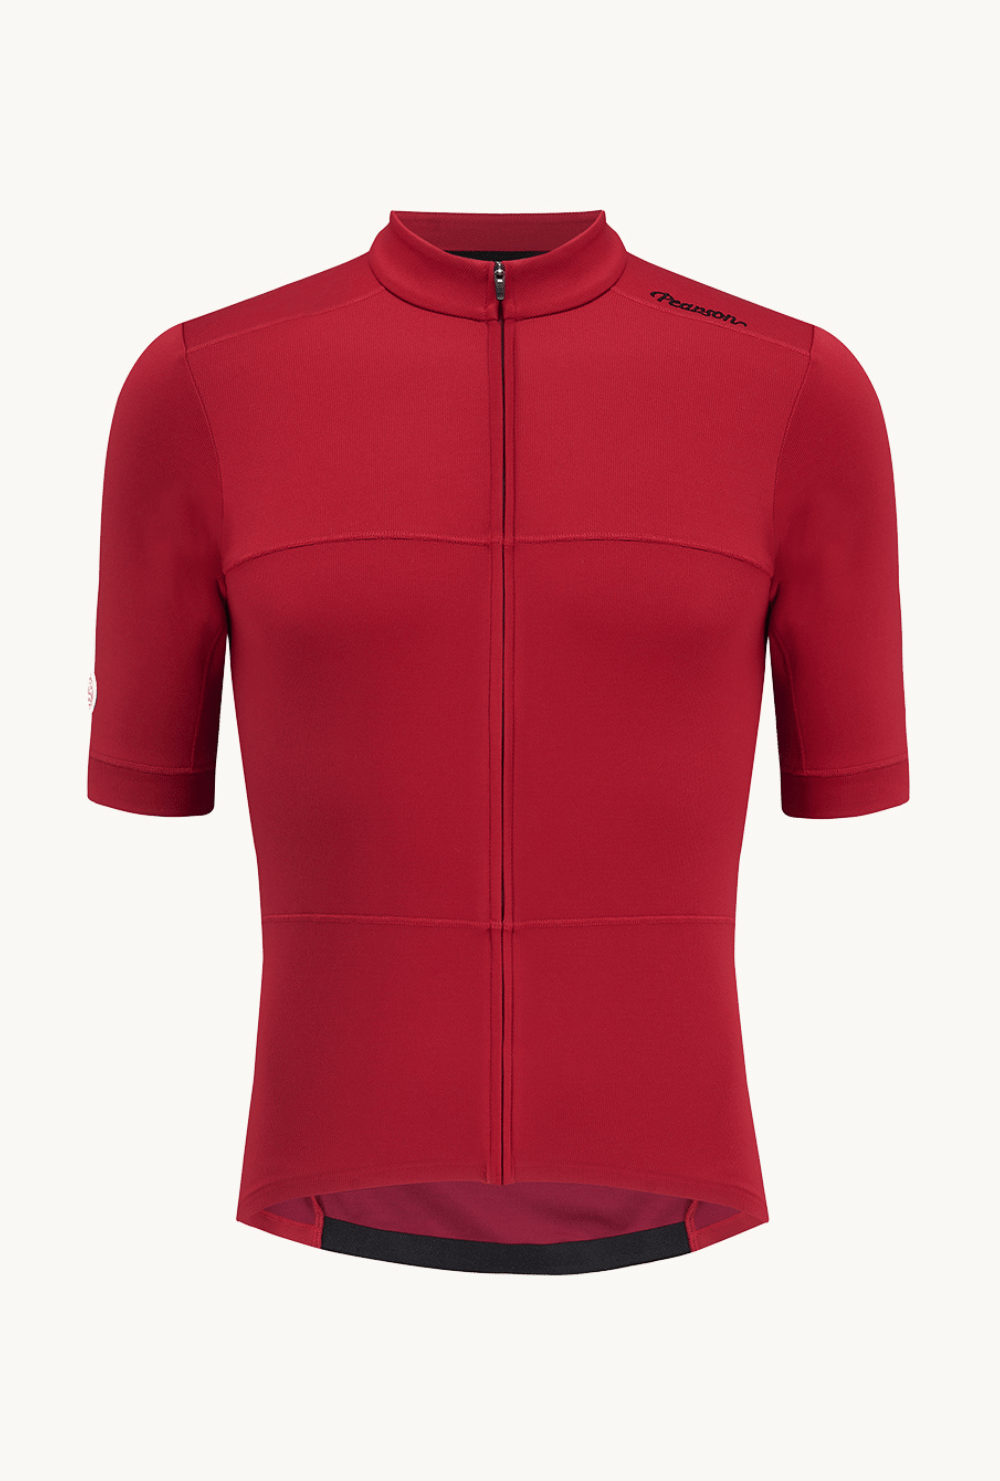 Pearson 1860  To Brighton - Road Short Sleeve Merino Sportwool Jersey  X-large / Red